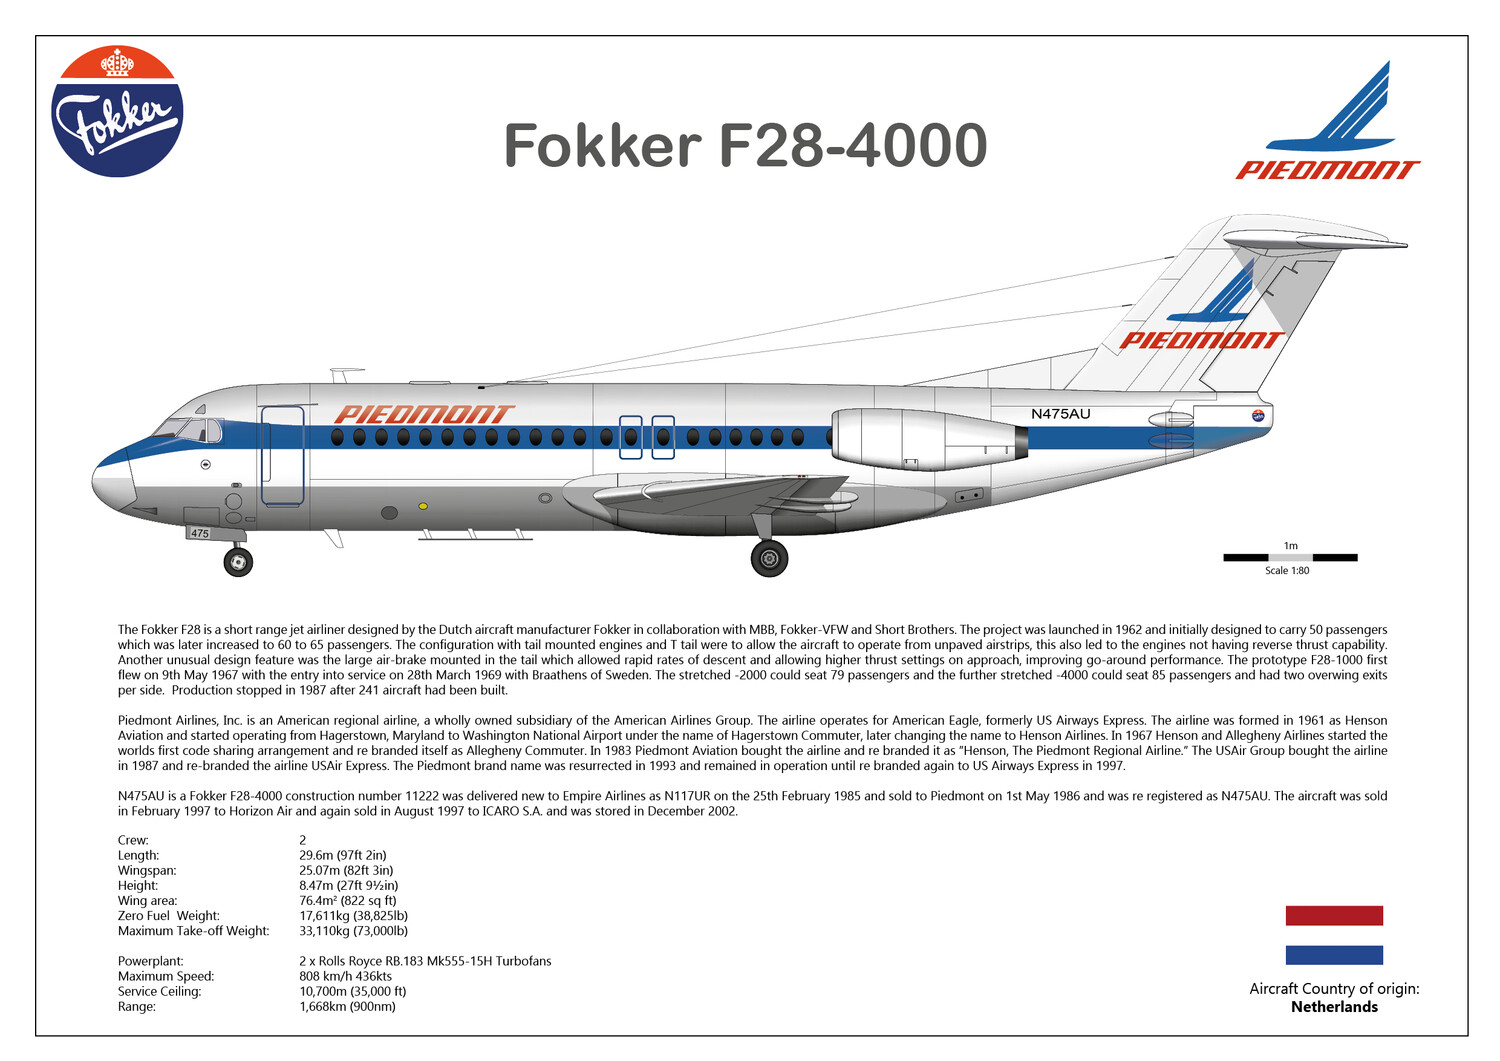 Fokker F28-4000 of Piedmont Airlines - Layout B